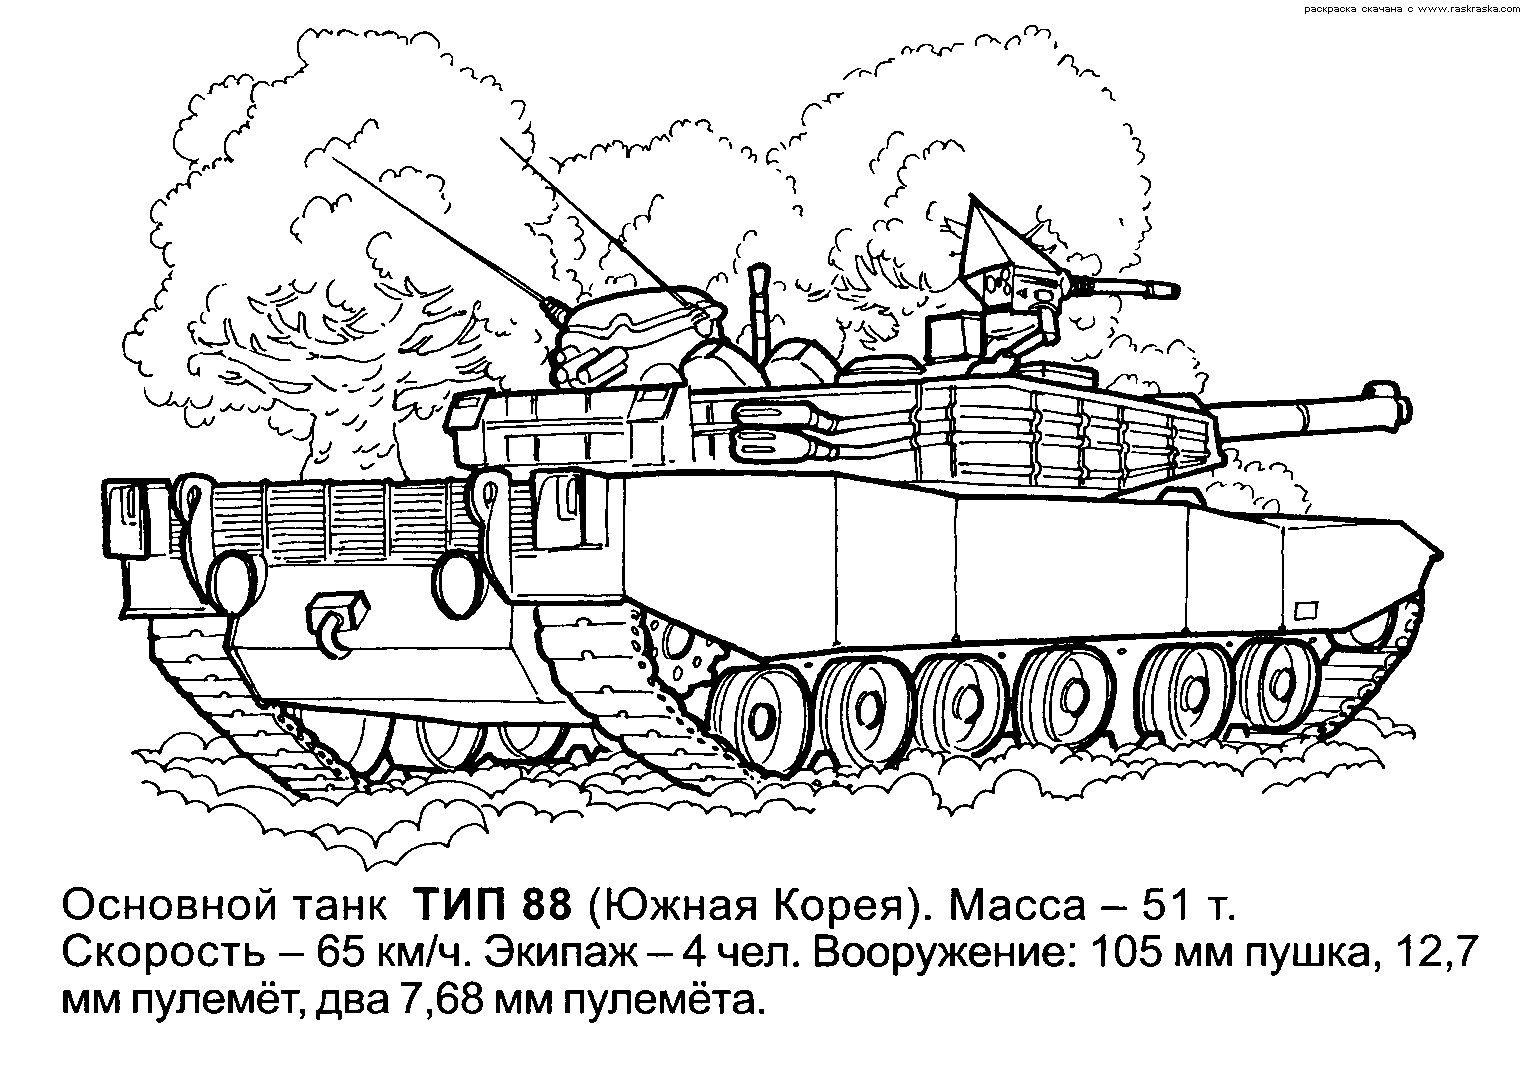 Tank Coloring pages  -  Free Coloring Pages - War - military -  #15